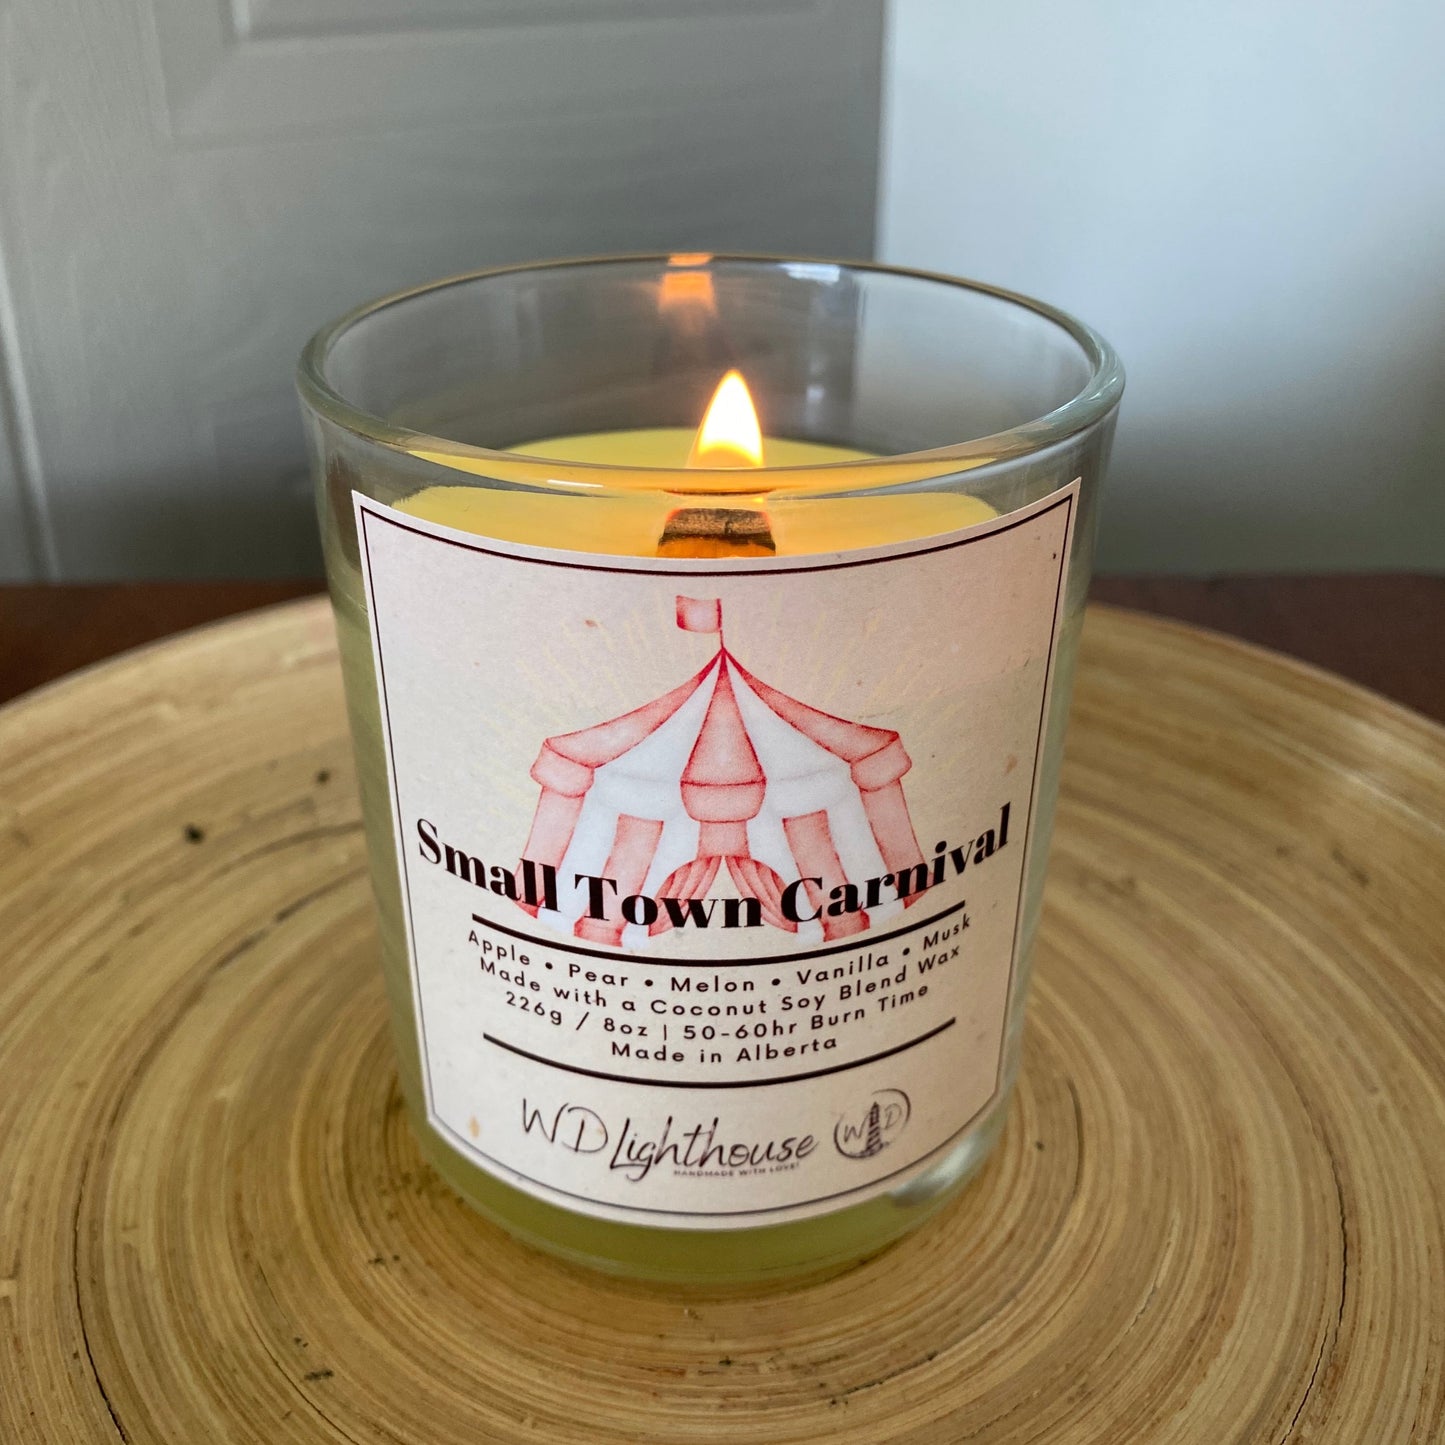 Small Town Carnival | Western Classic Bookish Coconut Soy Candle & Waxmelt